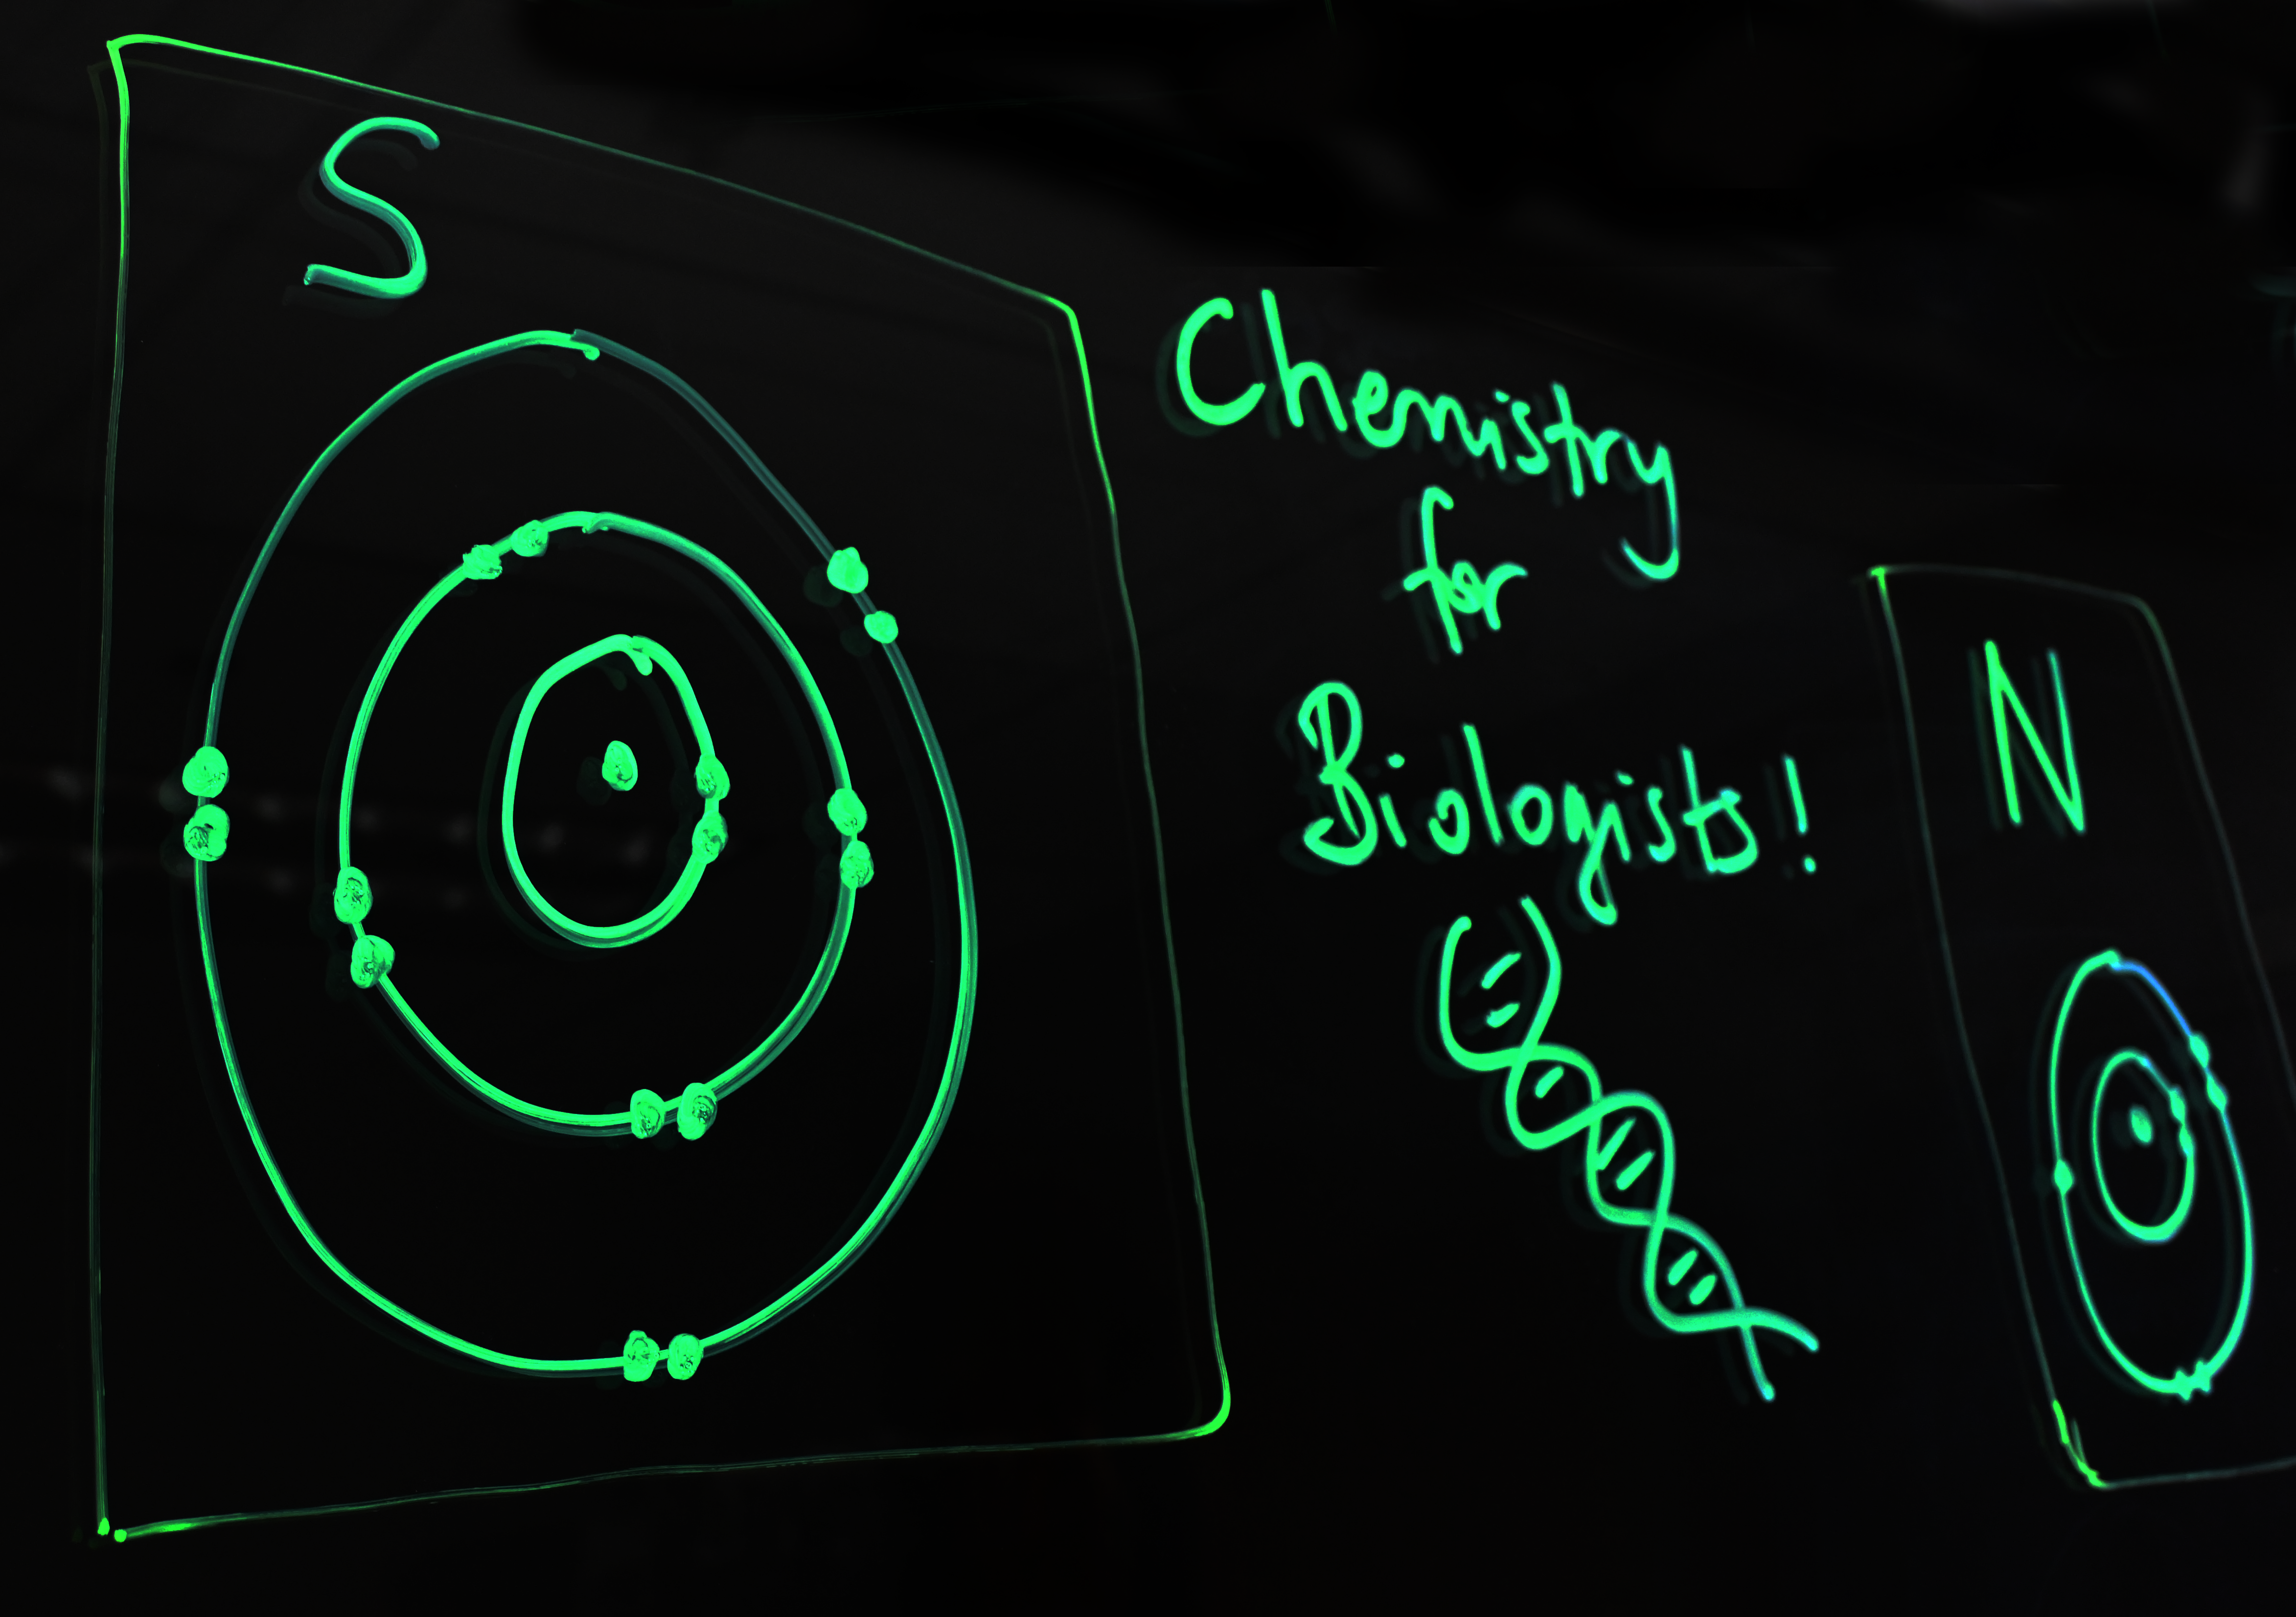 Writing on a light board says 'Chemistry for Biologists!' with a double helix drawing below it. On left side of the writing is a sulphur Bohr model and on the right is a nitrogen Bohr model.